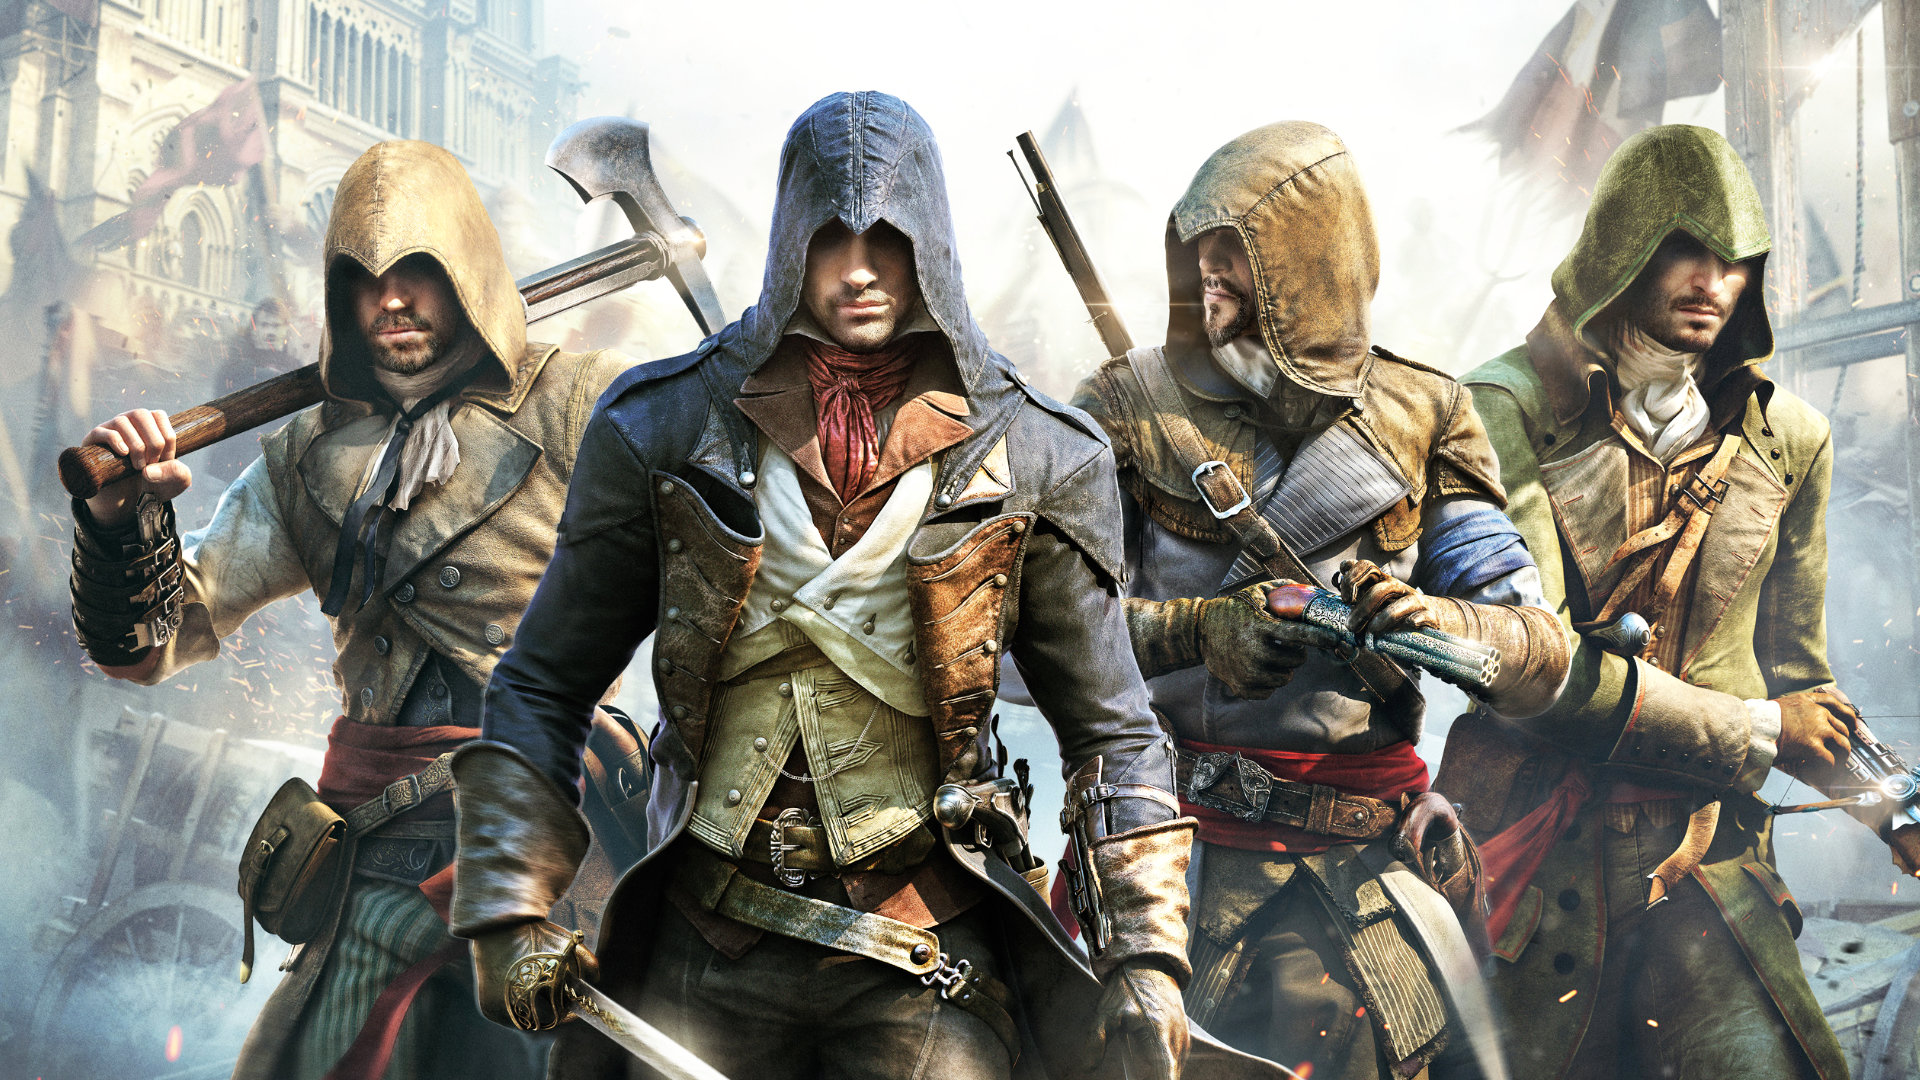 The most divisive Assassin's Creed game gets a massive revamp